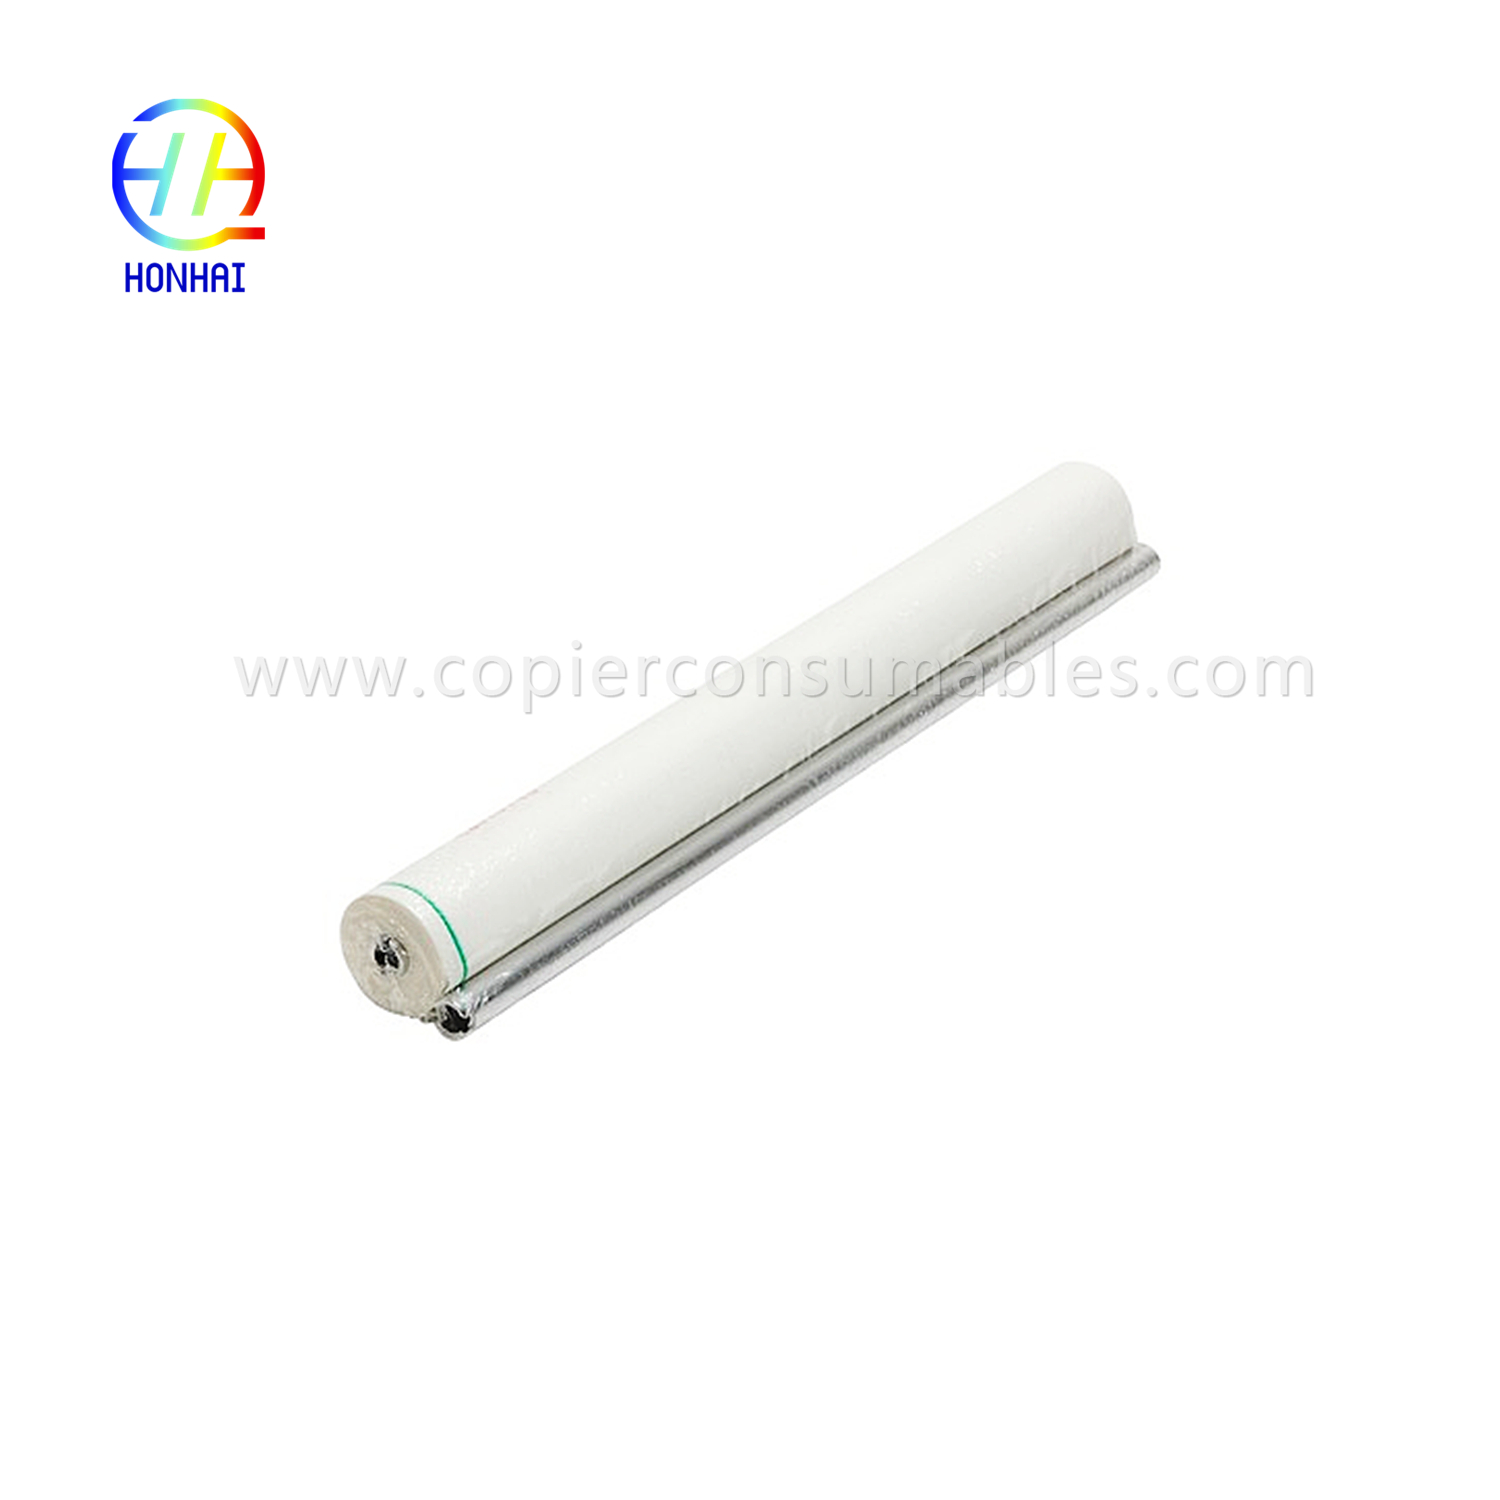 https://www.copierconsumables.com/web-roller-for-canon-imagerunner-advance-8085-8095-8105-8205-8285-8295-fc5-2286-000-oem-product/